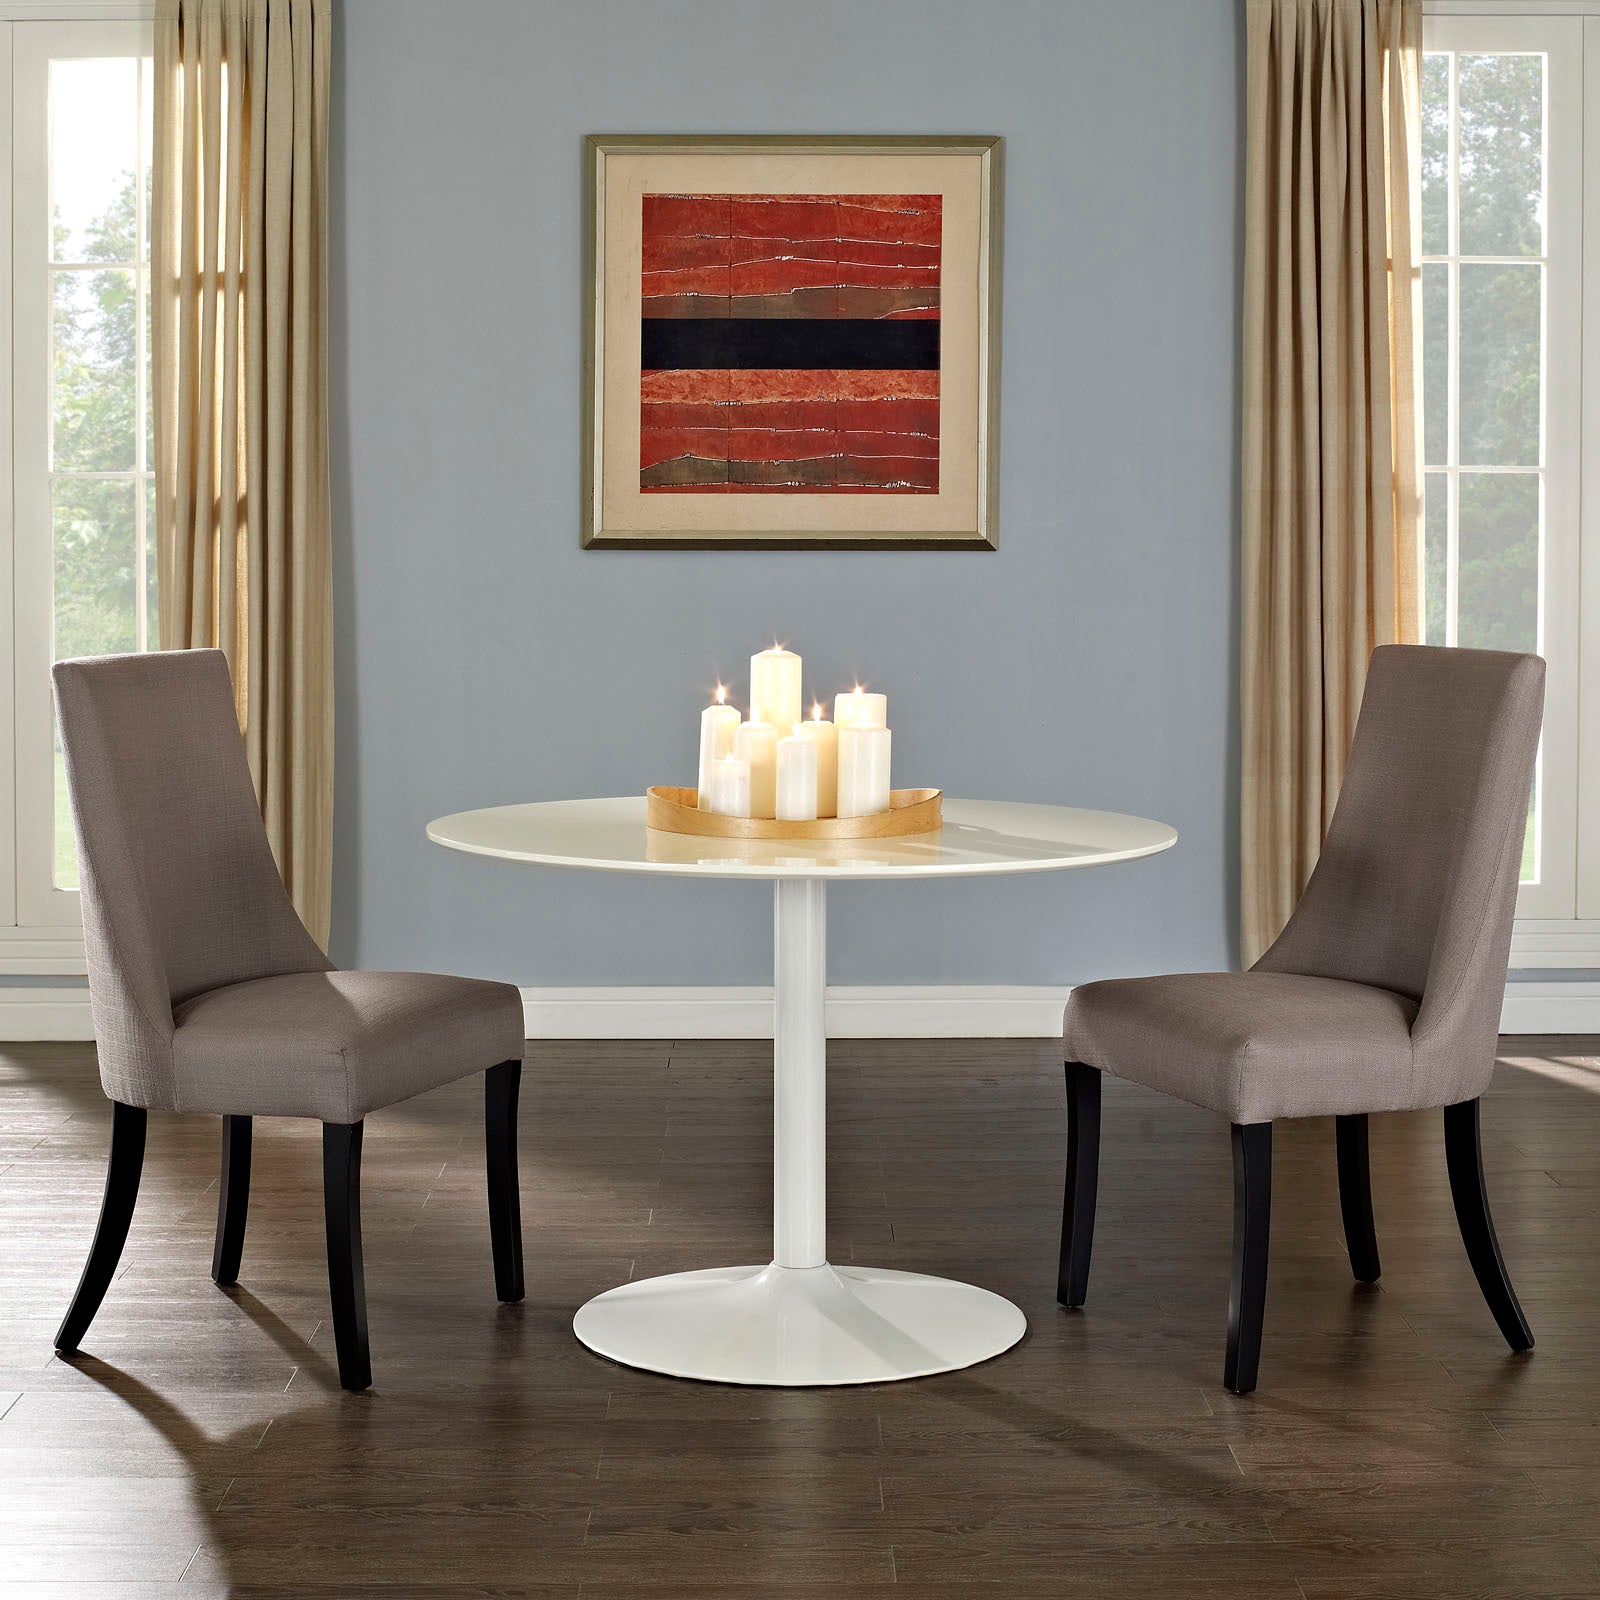 Reverie Dining Side Chair Set of 2